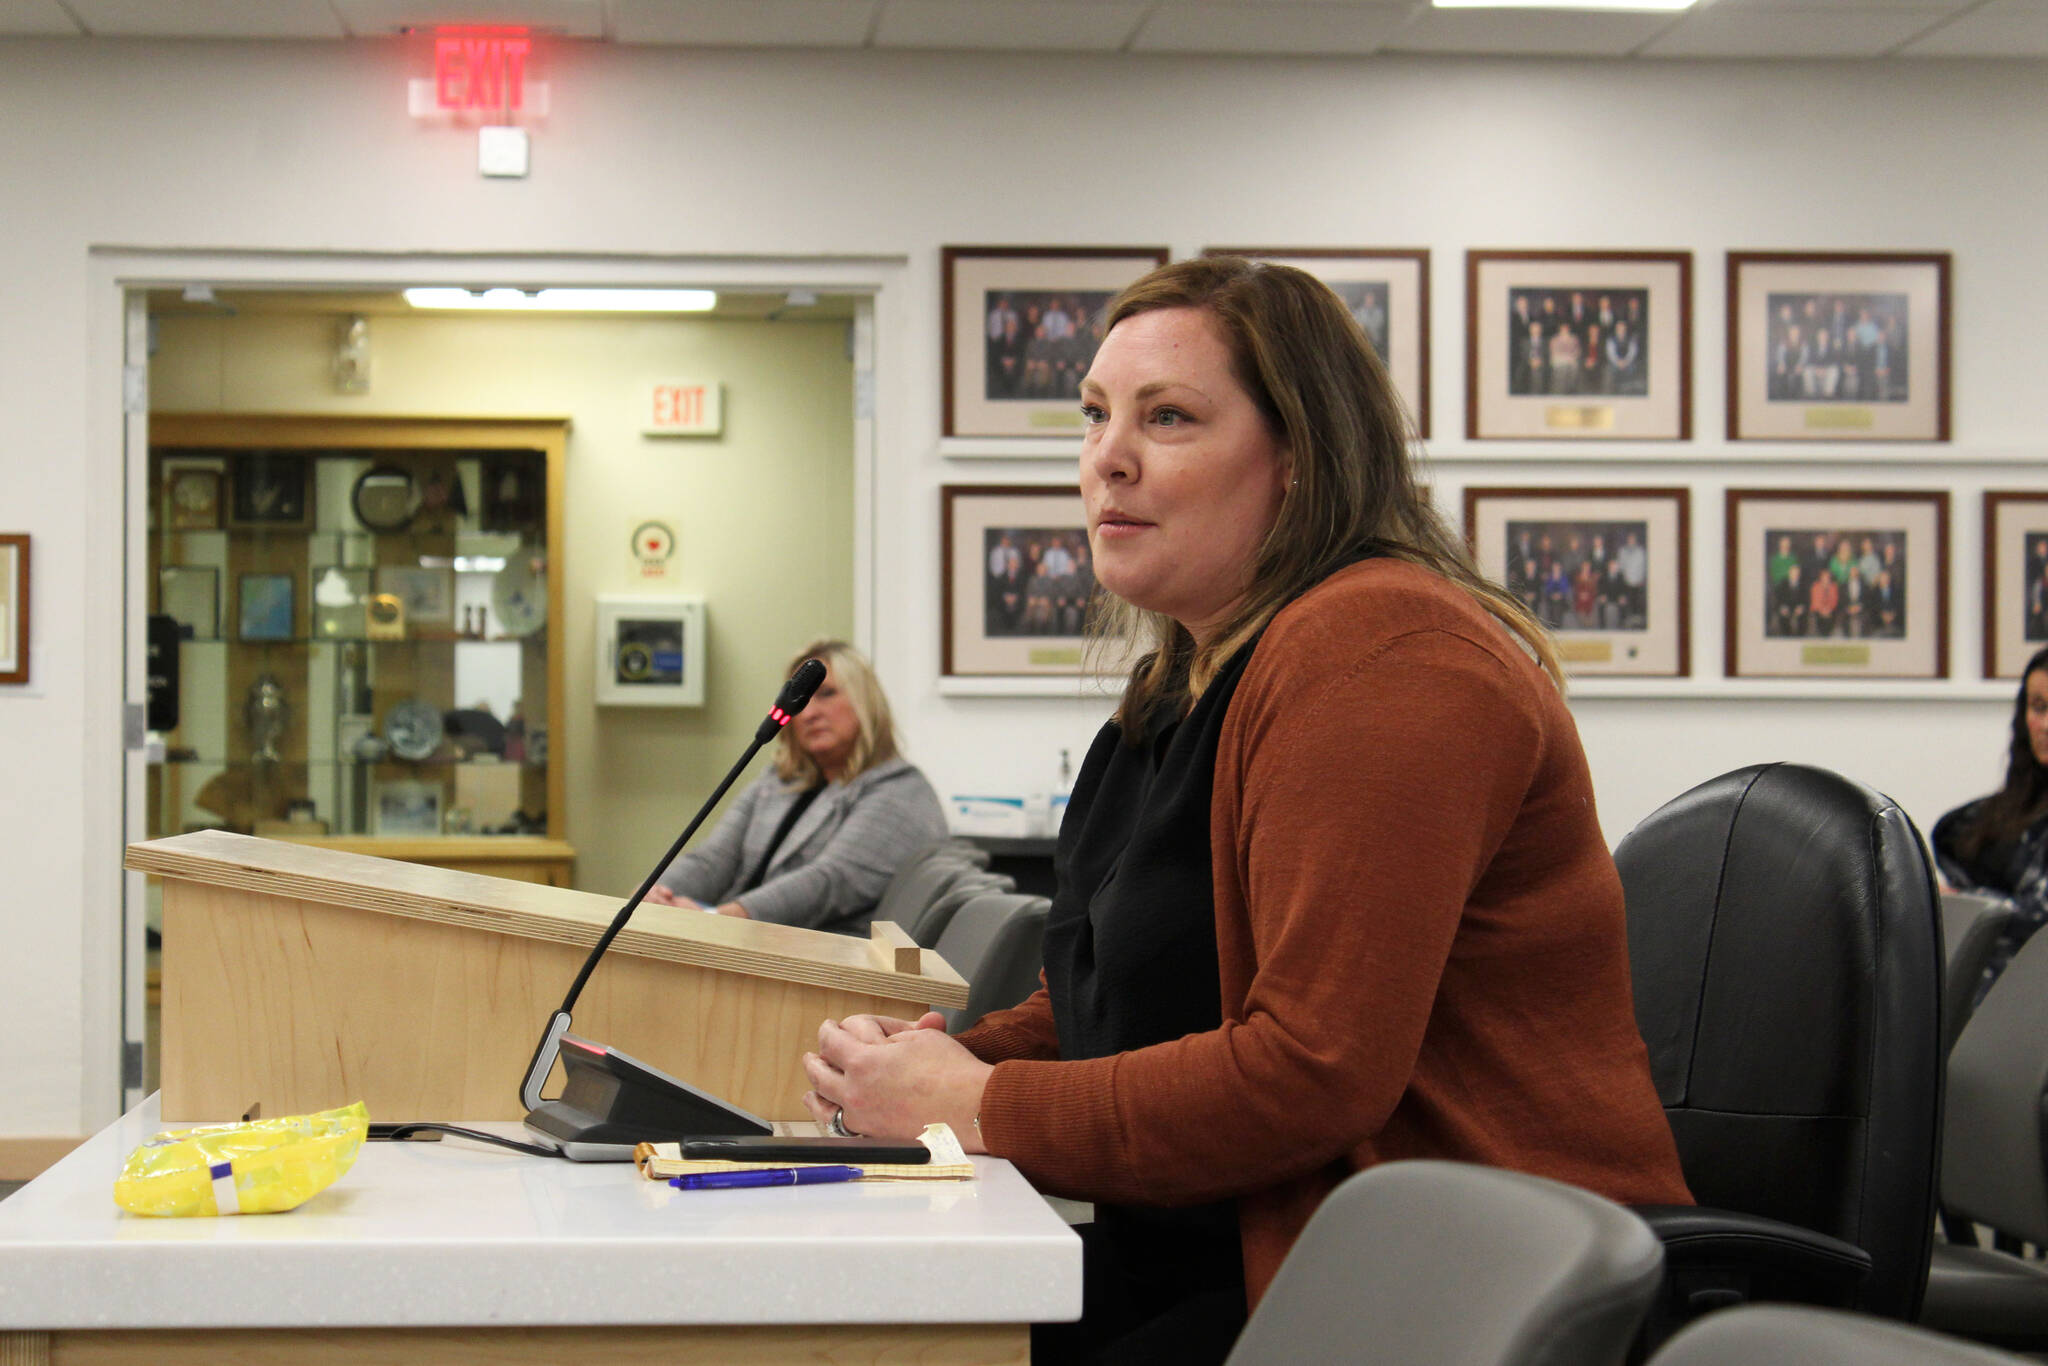 Soldotna City Manager Stephanie Queen testifies in support of legislation overhauling the borough's planning commission appointment process during a meeting of the Kenai Peninsula Borough Assembly on Tuesday, Dec. 7, 2021 in Soldotna, Alaska. (Ashlyn O'Hara/Peninsula Clarion)